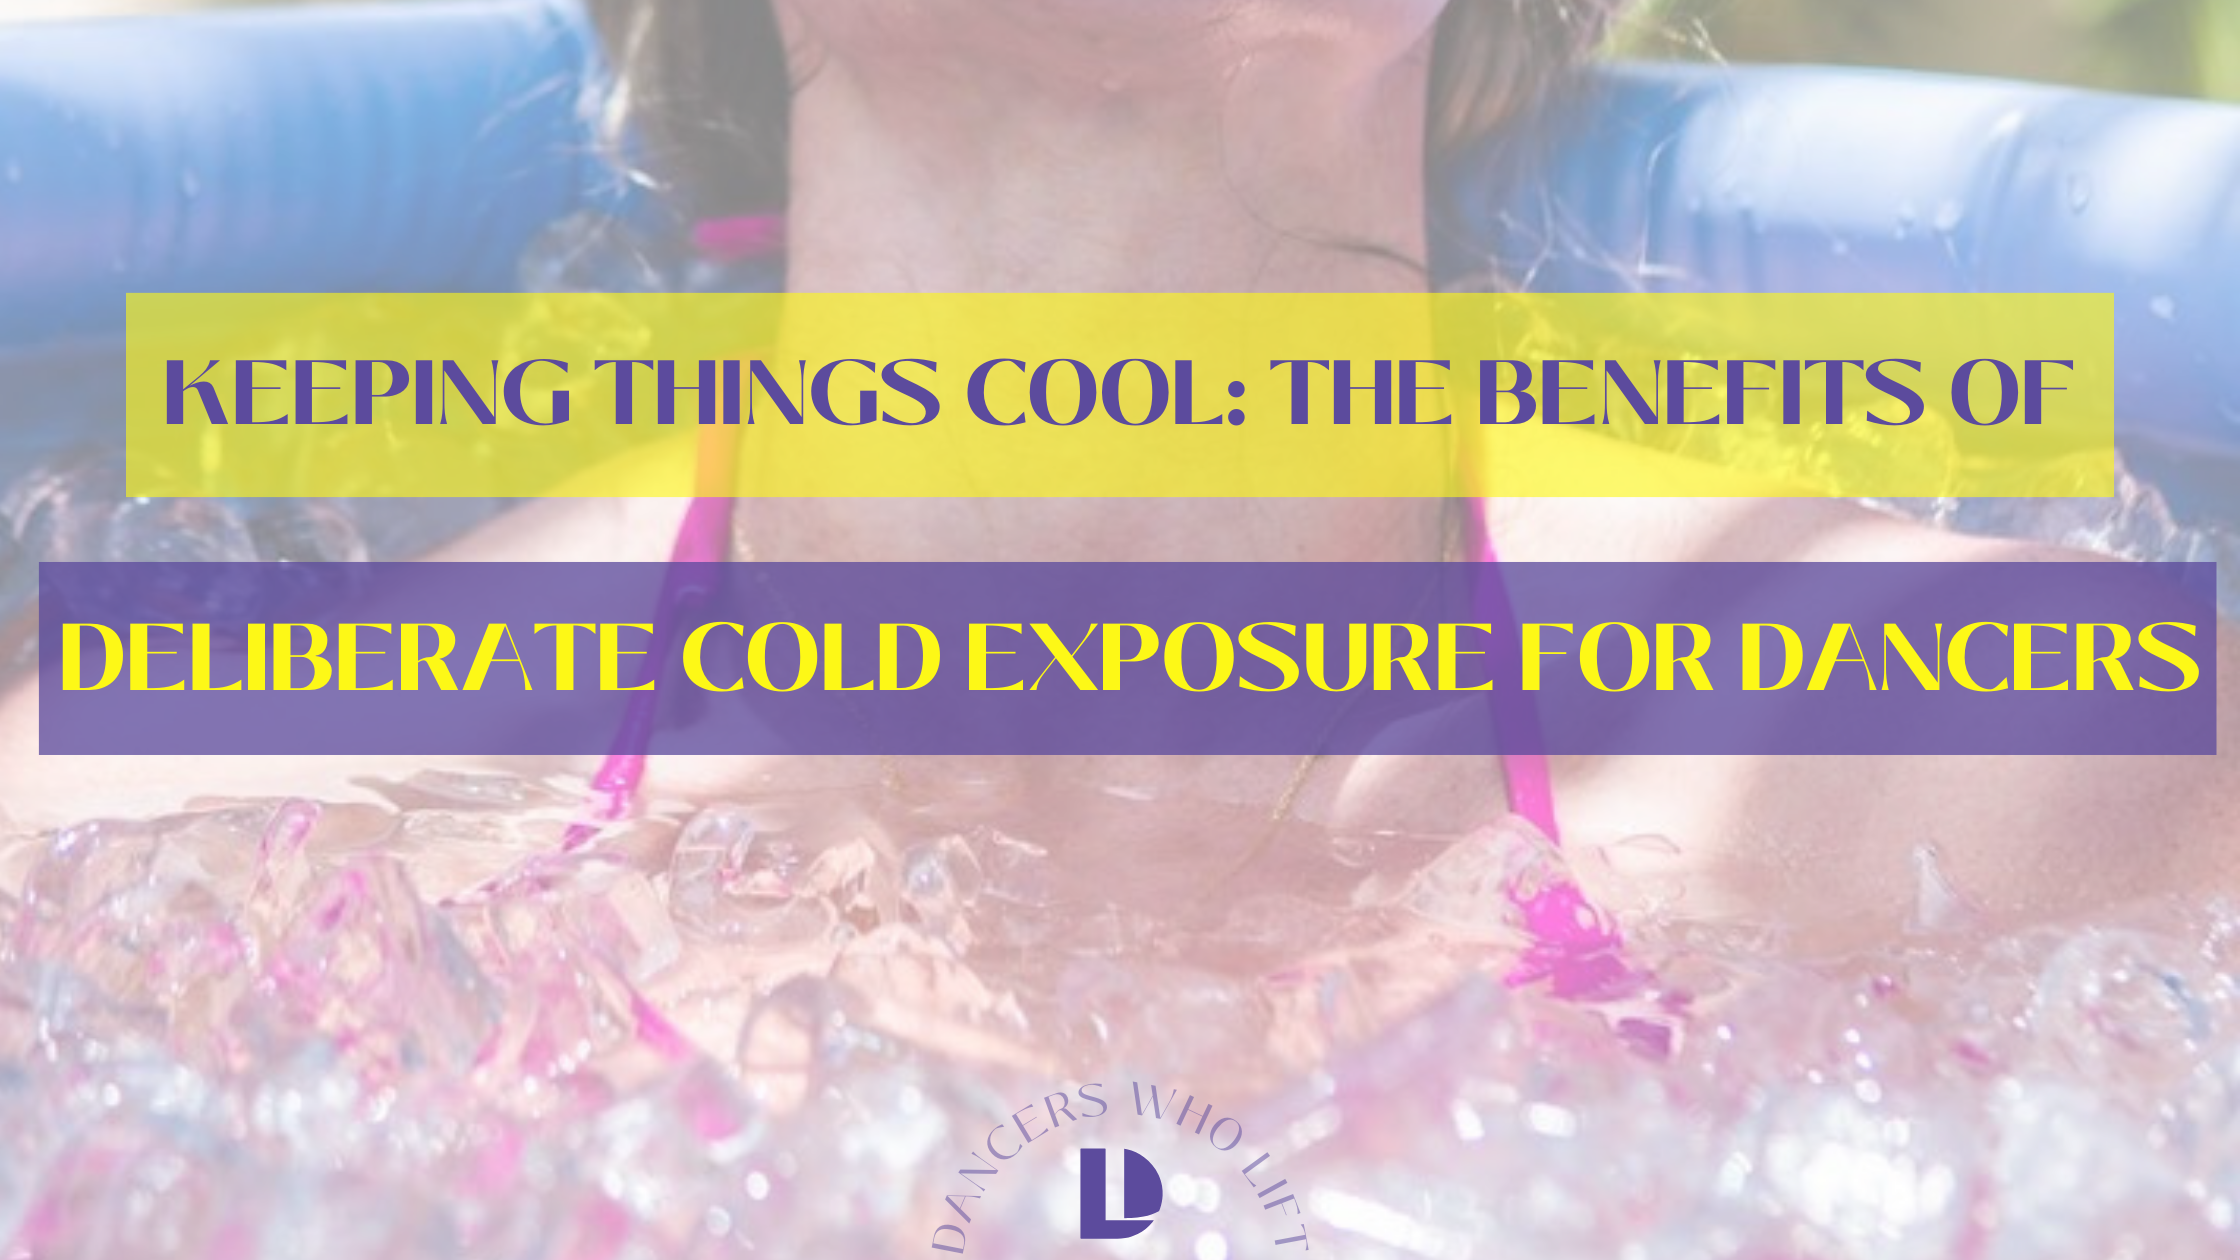 deliberate cold exposure, ice bath, cryotherapy